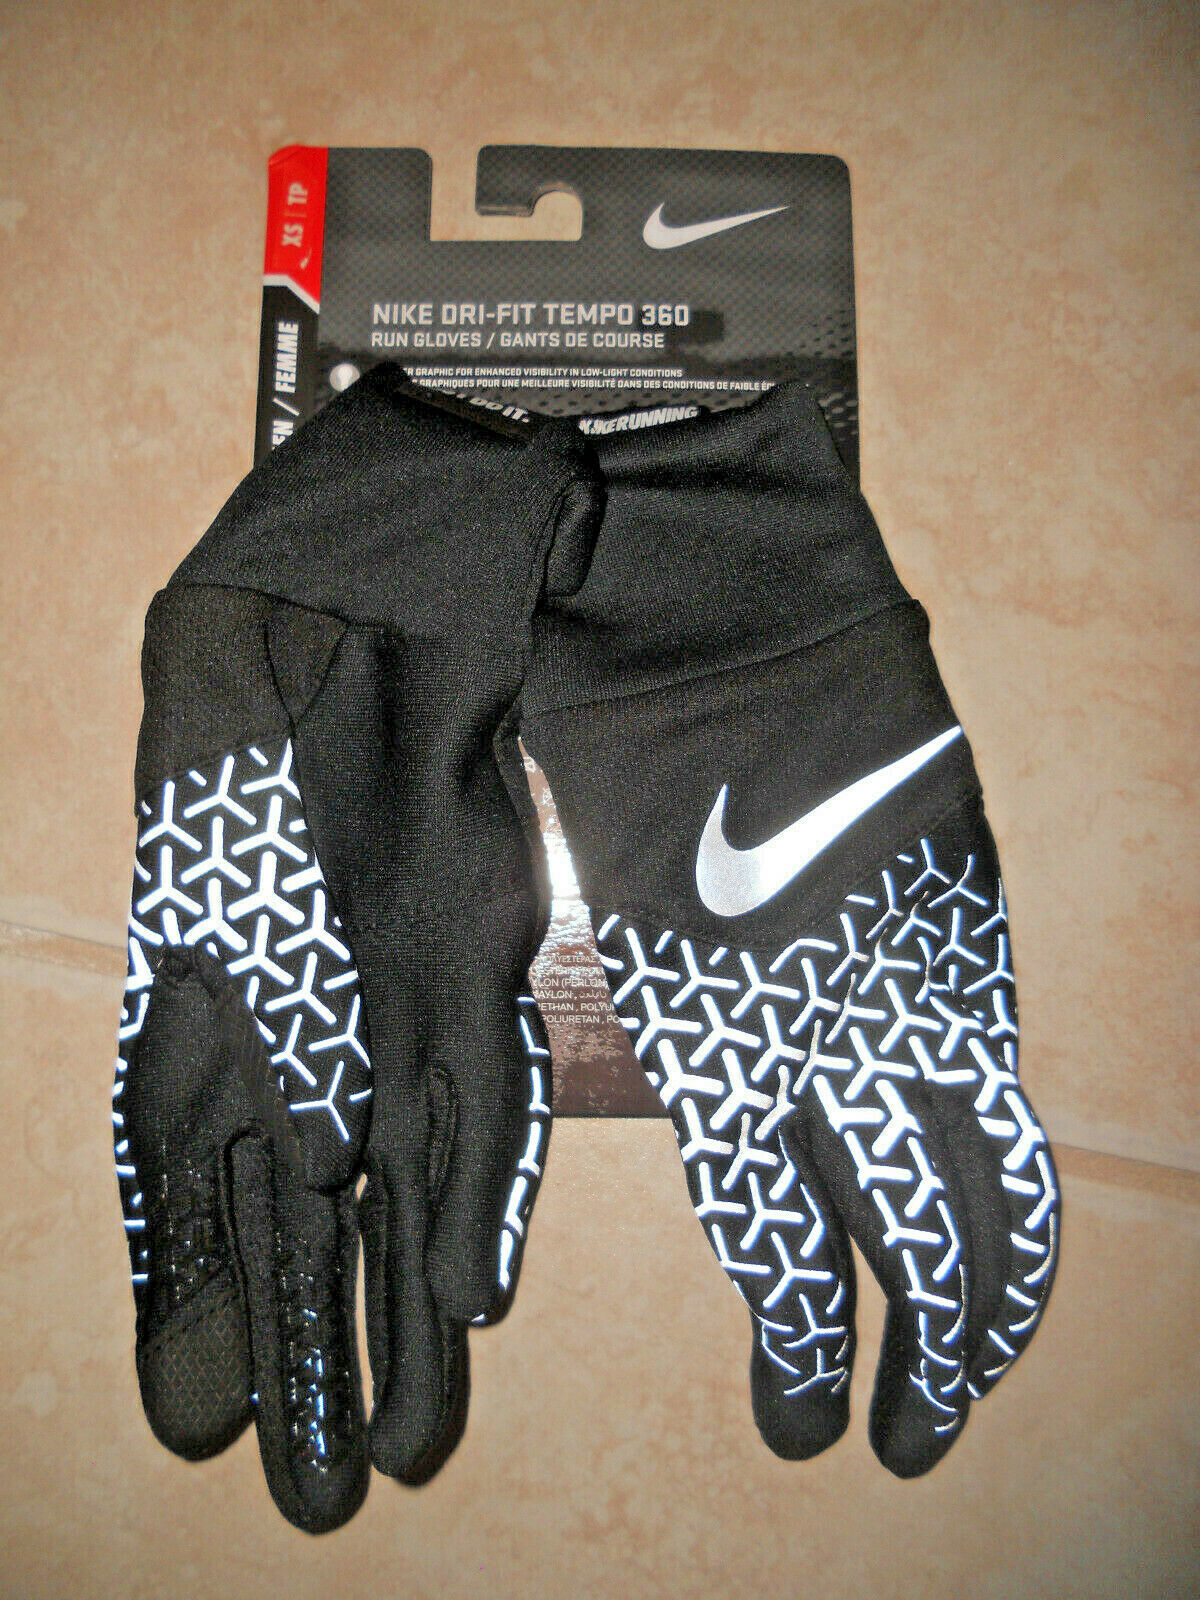 Primary image for NWT Nike Dri-Fit Tempo 360 Run Gloves Women's Size X-Small